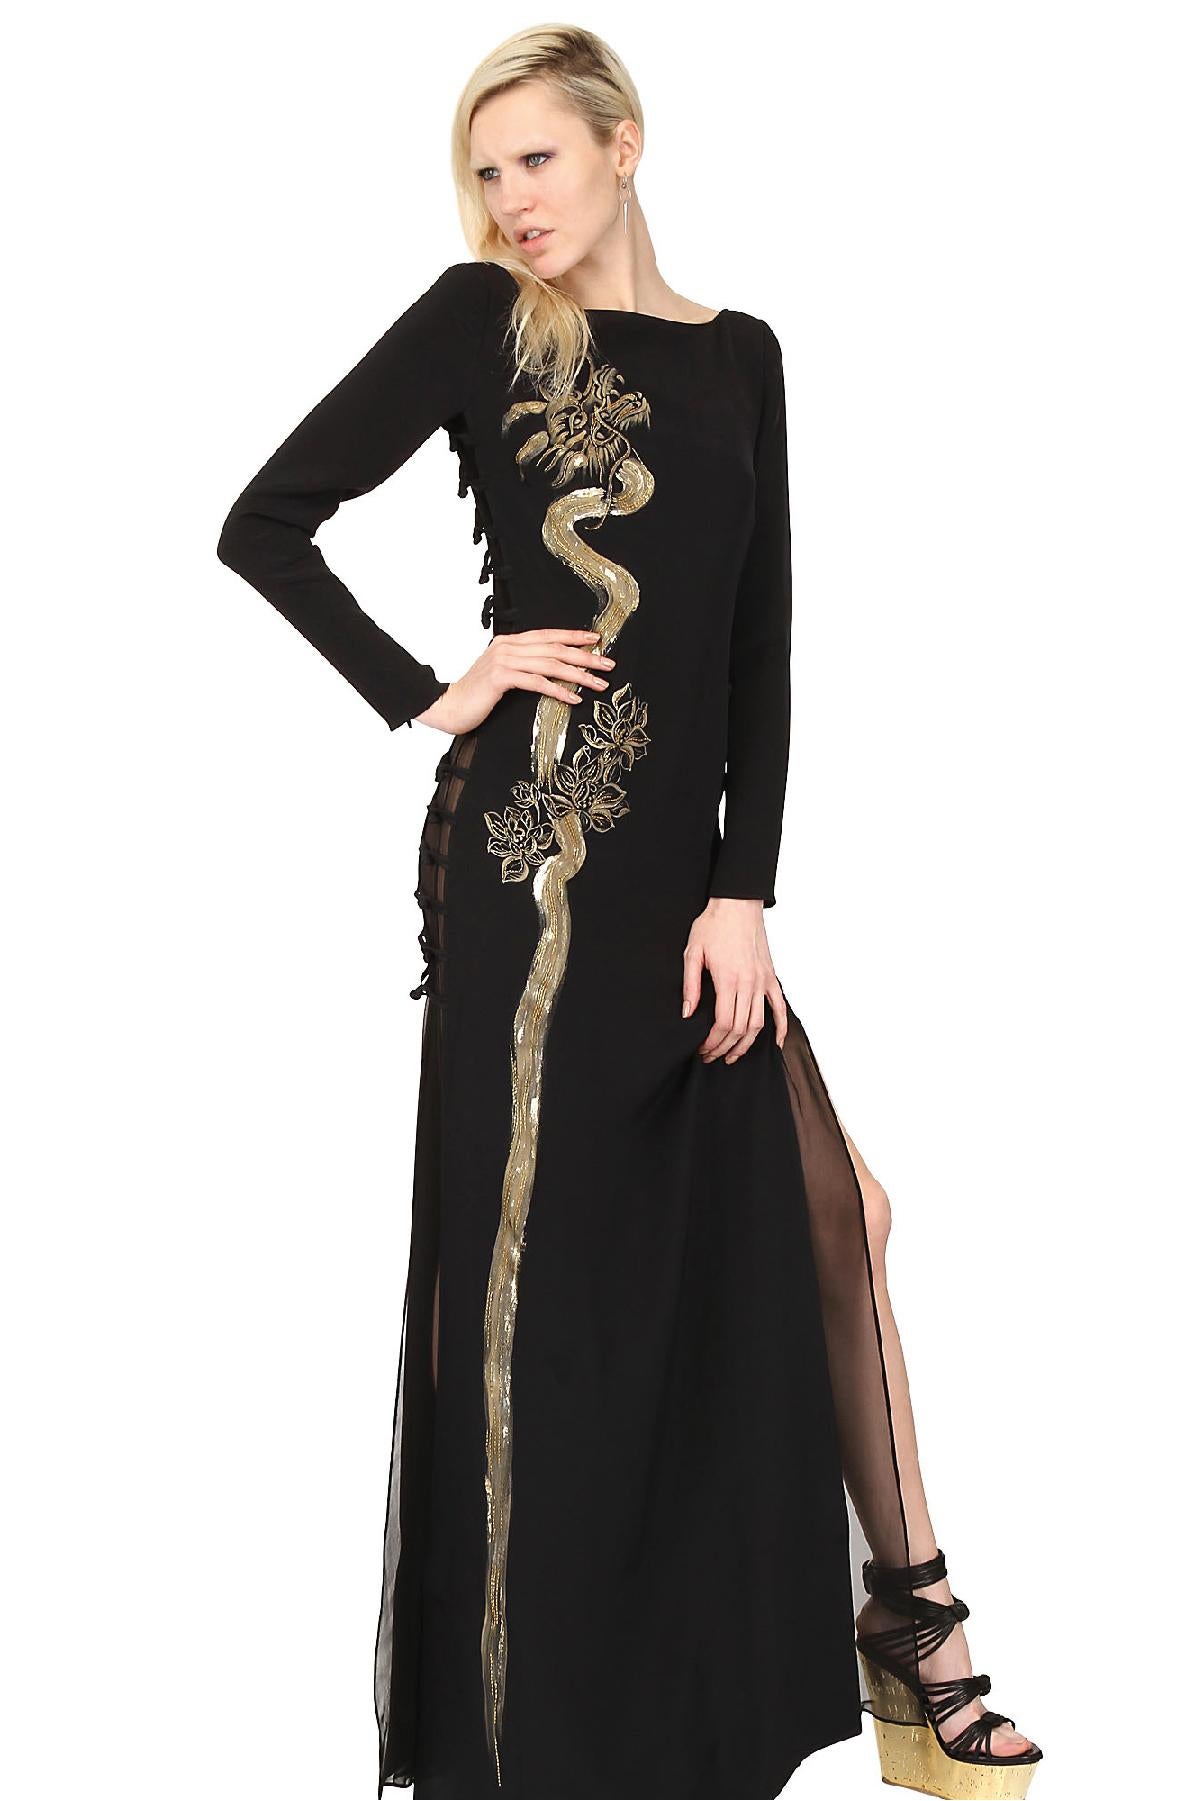 This stunning EMILIO PUCCI column gown comes in black silk crepe with a wide scoop neck, long sleeves with zip cuffs, open side cutouts with fabric buttons, chiffon liner, and beautiful hand painted metallic gold dragon motif with beading. Made in